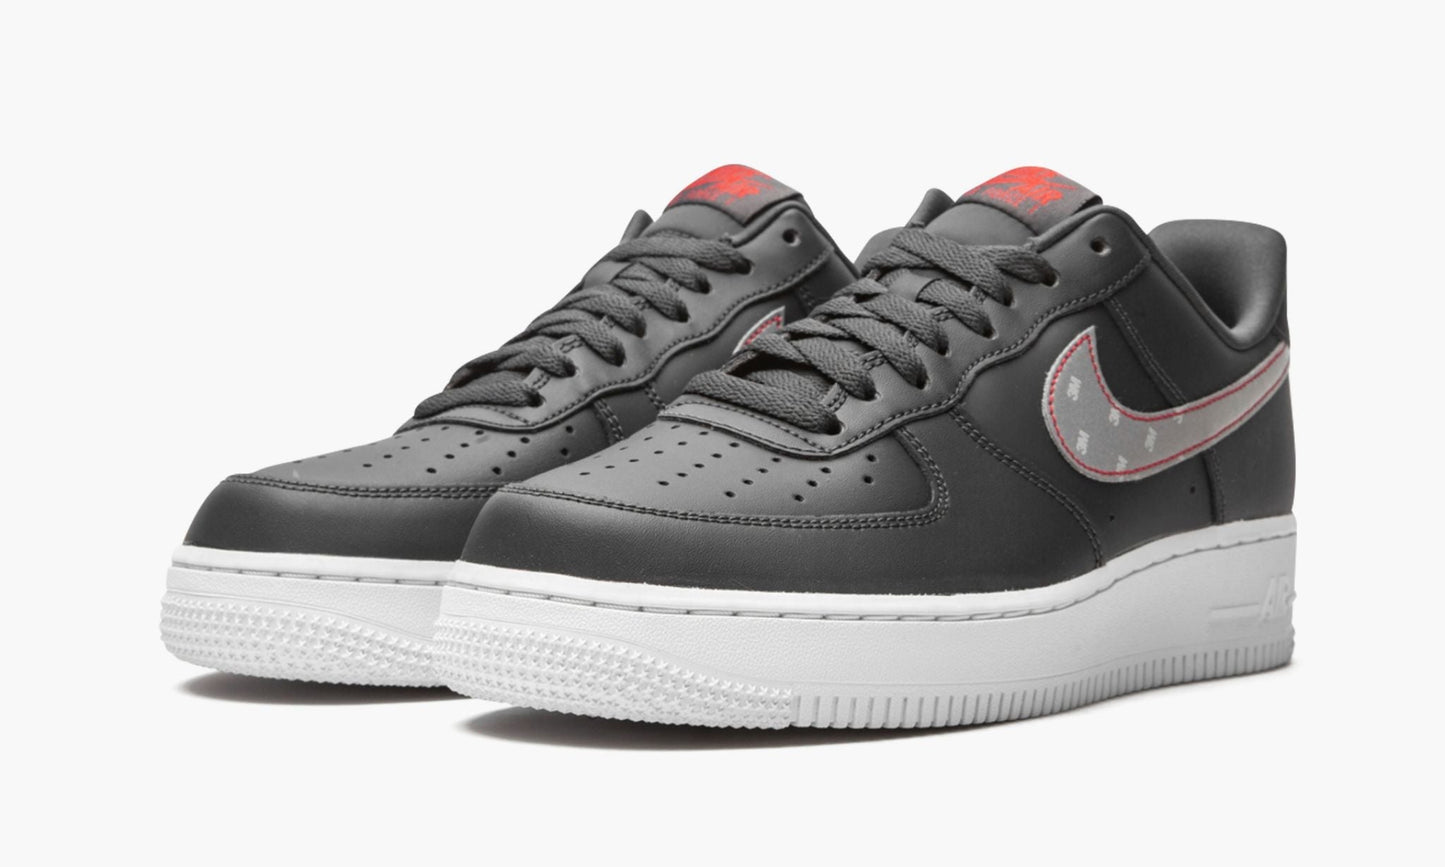 Air Force 1 '07 3M "Anthracite"